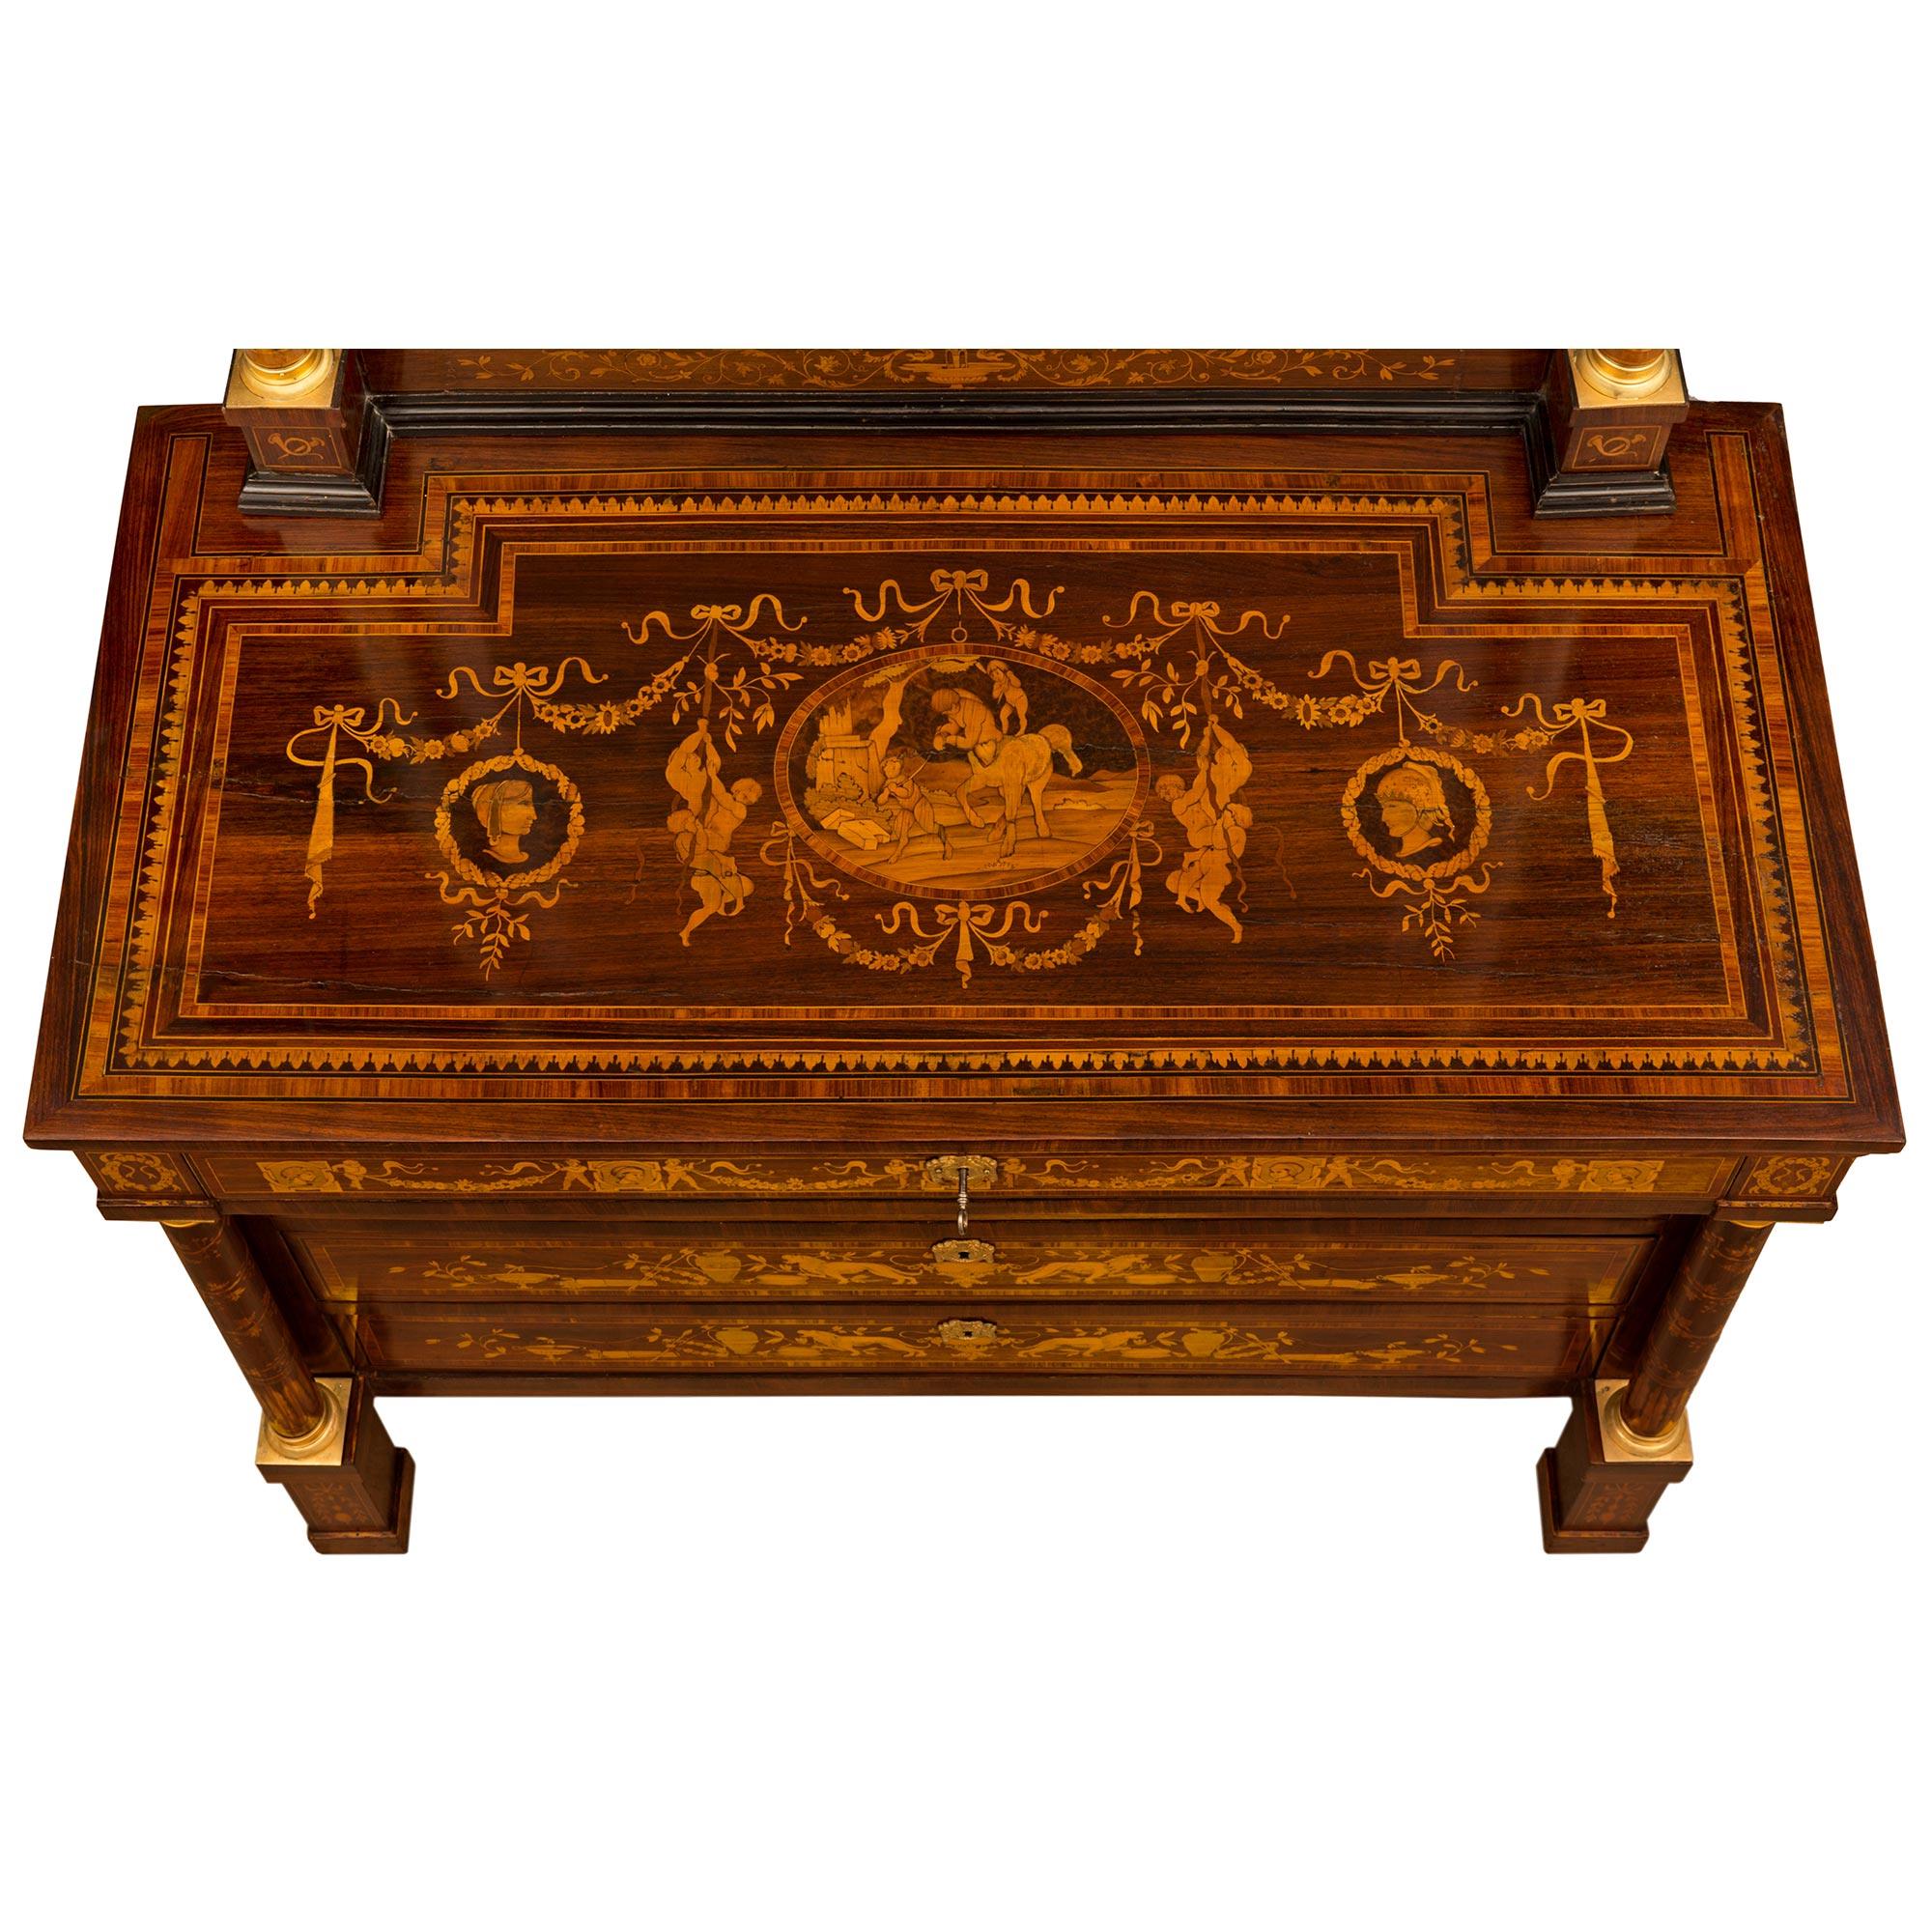 An exquisite and extremely decorative Italian early 19th century Neo-Classical st. ormolu, Fruitwood, and ebonized Fruitwood inlaid chest and original matching mirror. The four-drawer chest in the manner of Giuseppe Maggiolini is raised by elegant